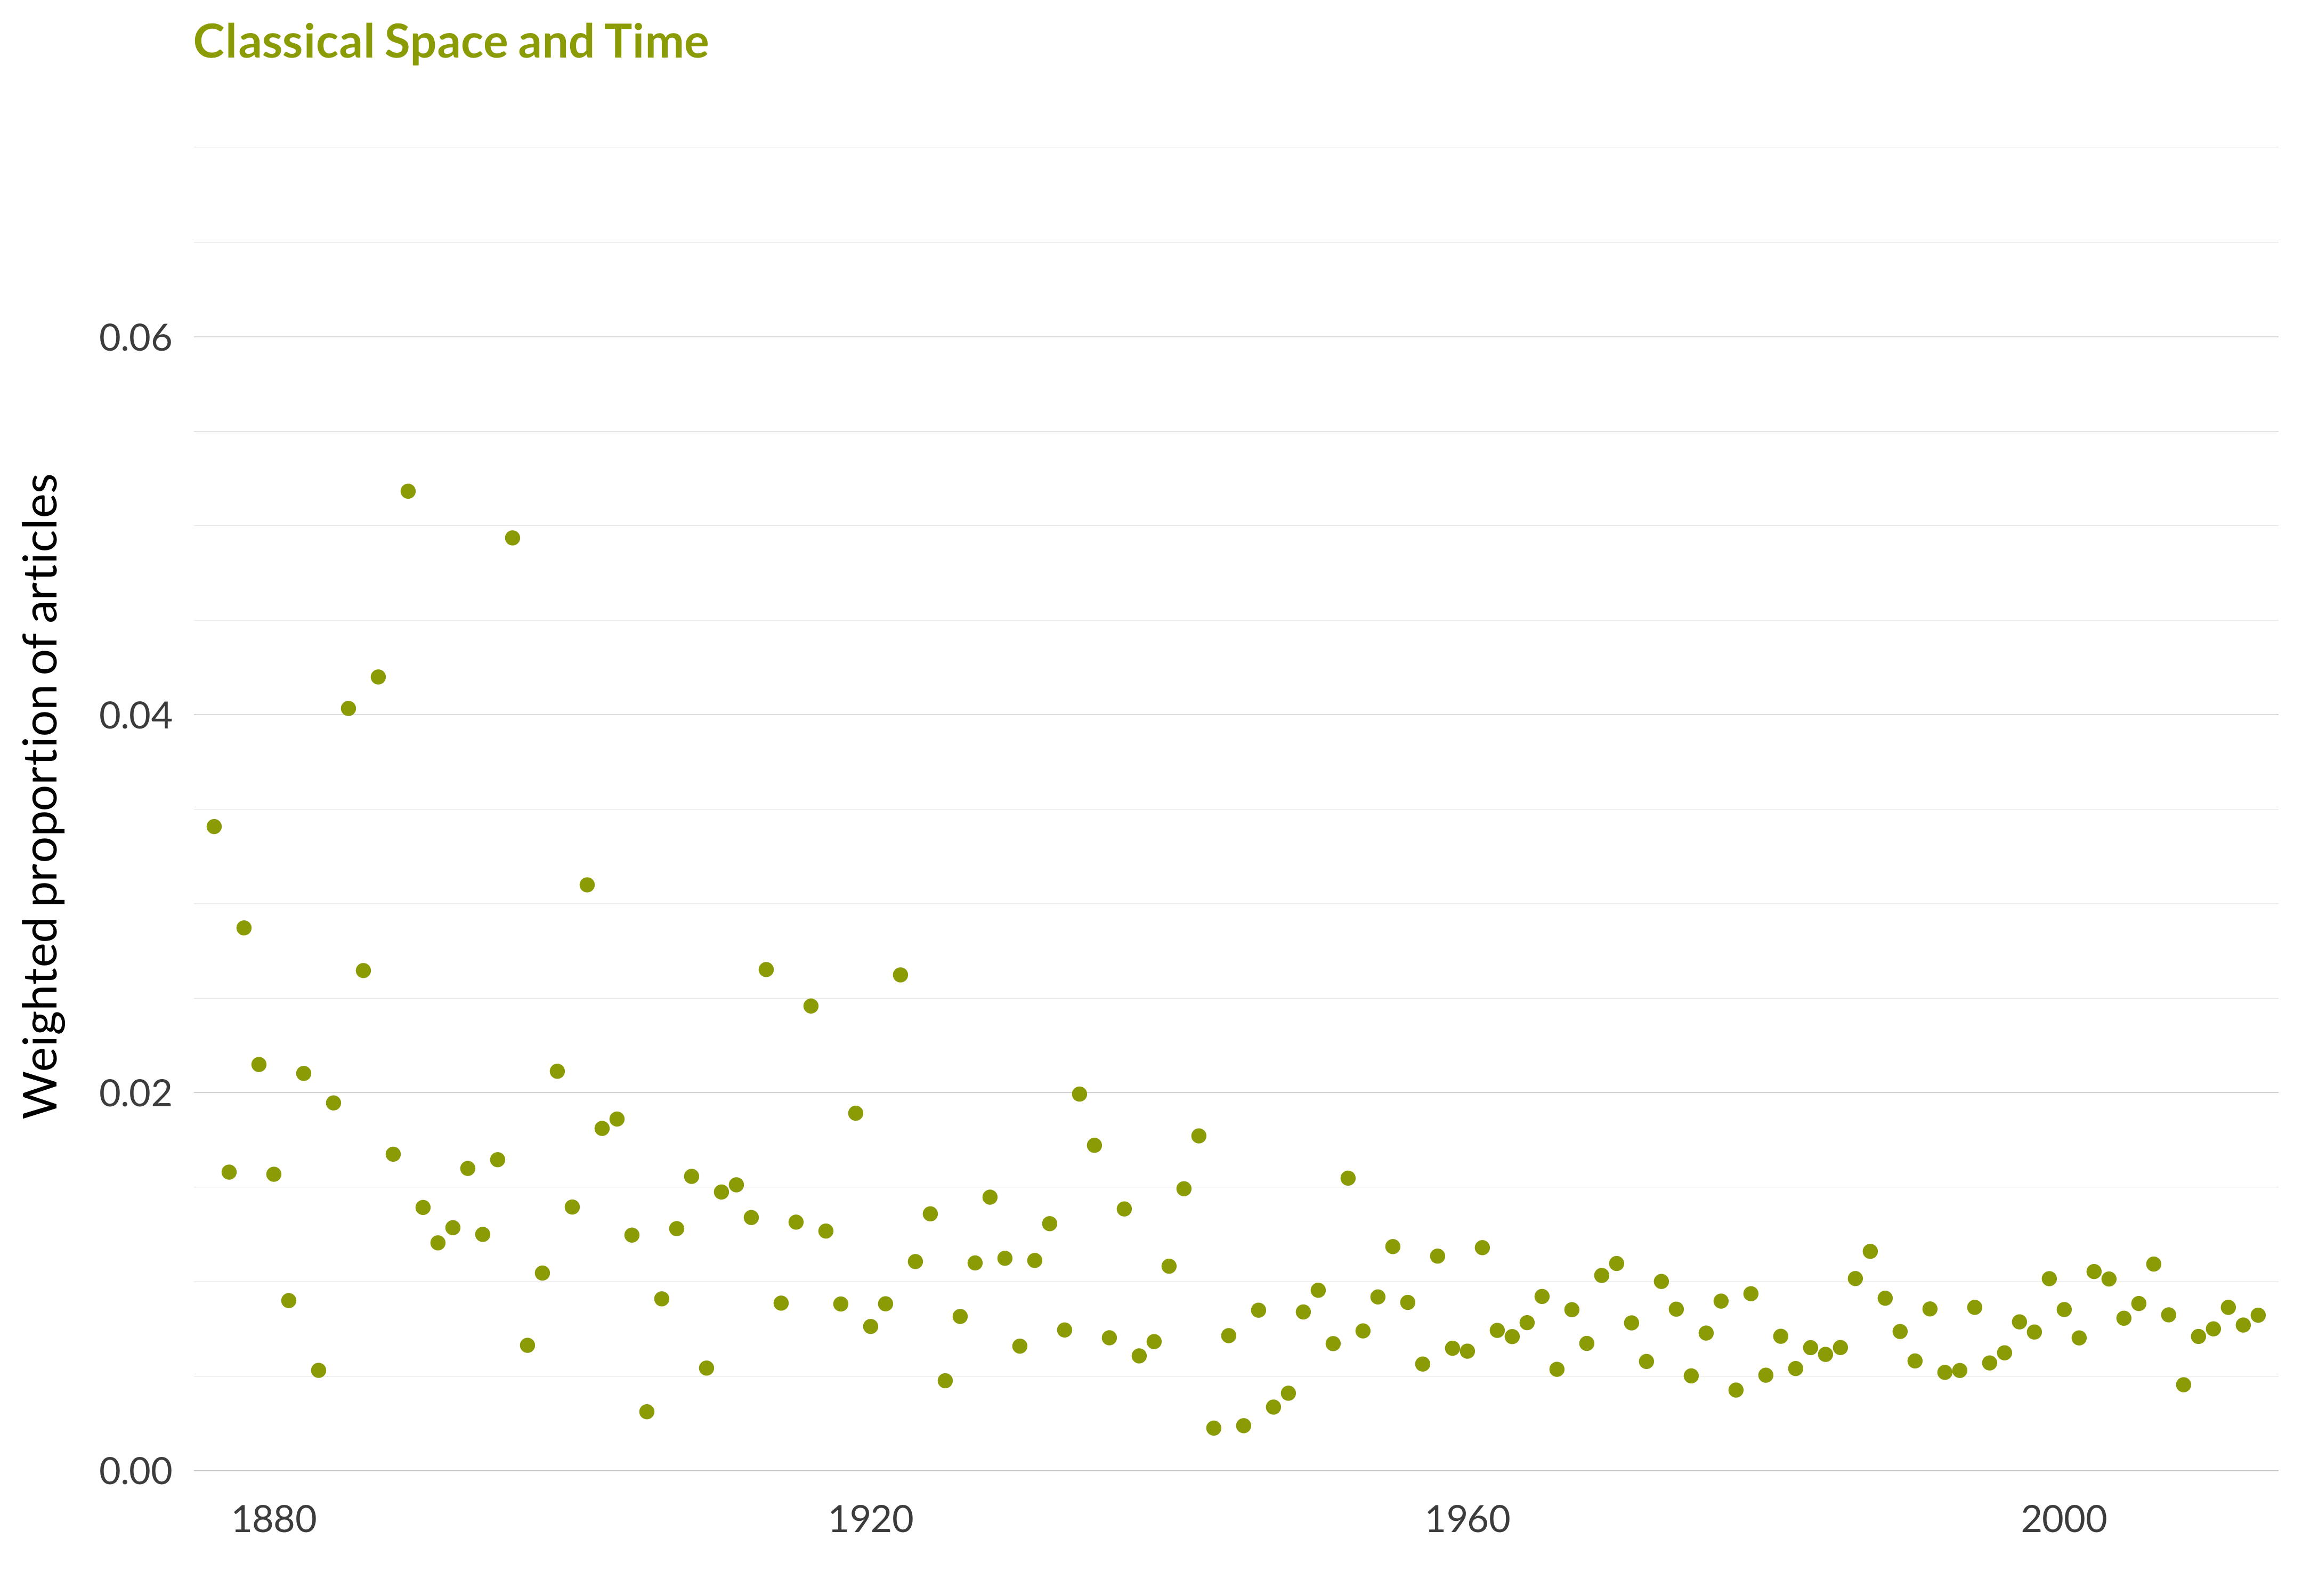 A scatterplot showing which proportion of articles each year are in the classical space and timetopic. The x-axis shows the year, the y-axis measures the proportion of articles each year in this topic. There is one dot per year. The highest value is in 1889 when 5.2% of articles were in this topic. The lowest value is in 1943 when 0.2% of articles were in this topic. The full table that provides the data for this graph is available in Table A.20 in Appendix A.